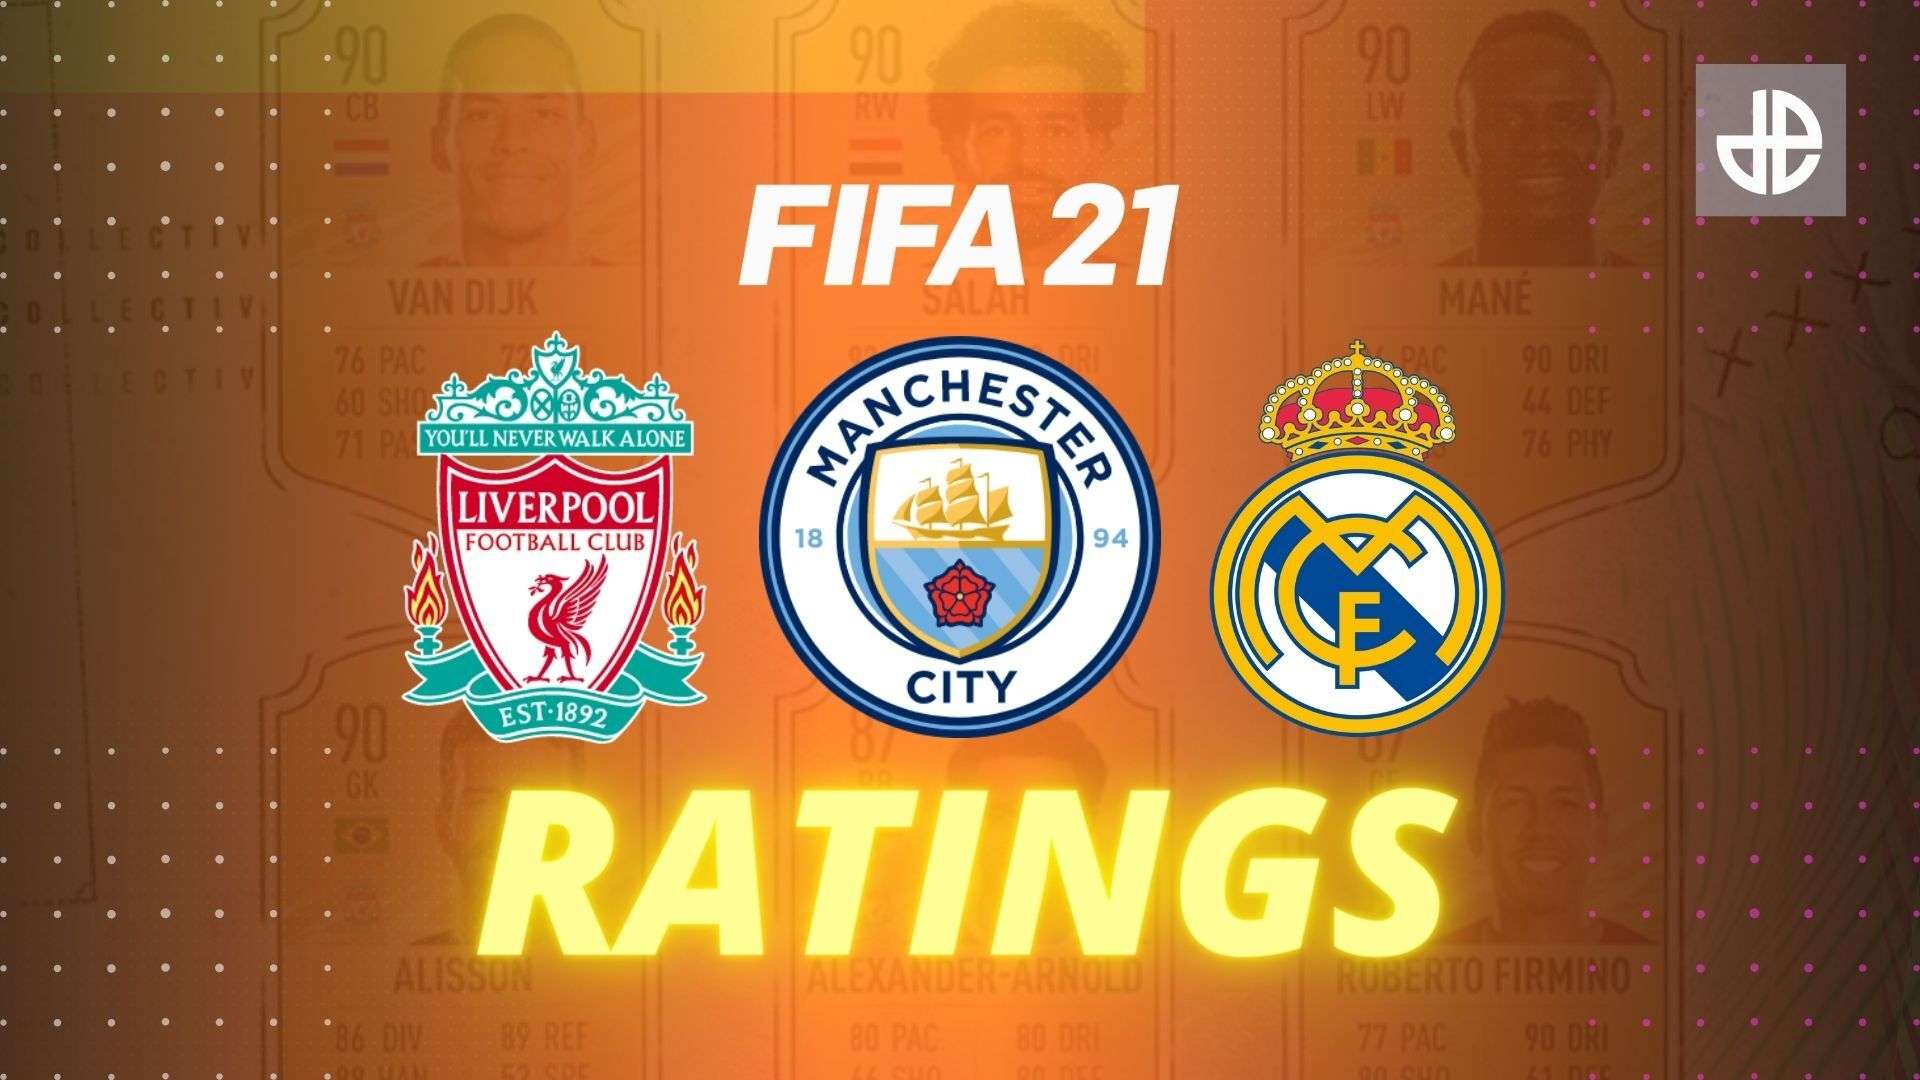 FIFA 21 ratings for Liverpool, Manchester City, and Real Madrid